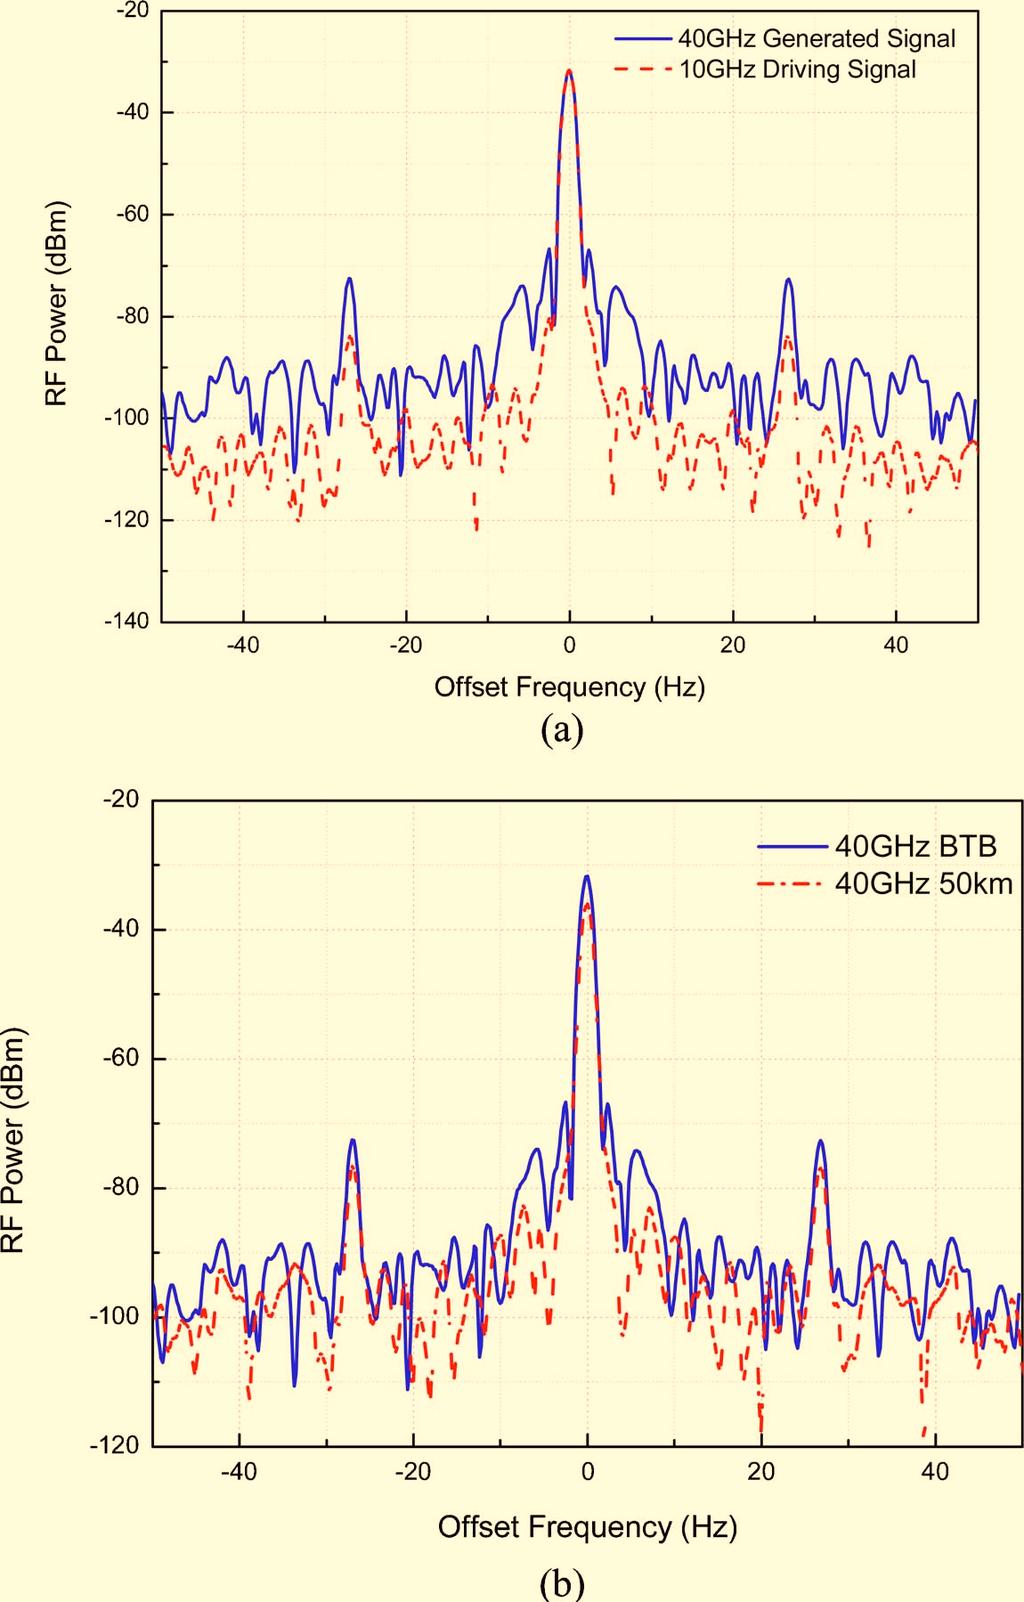 Vol. 8, No. 2 / February 2009 / JOURNAL OF OPTICAL NETWORKING 194 Fig. 4. Electrical spectrum of the generated 40 GHz millimeter-wave signal with 100 Hz span.